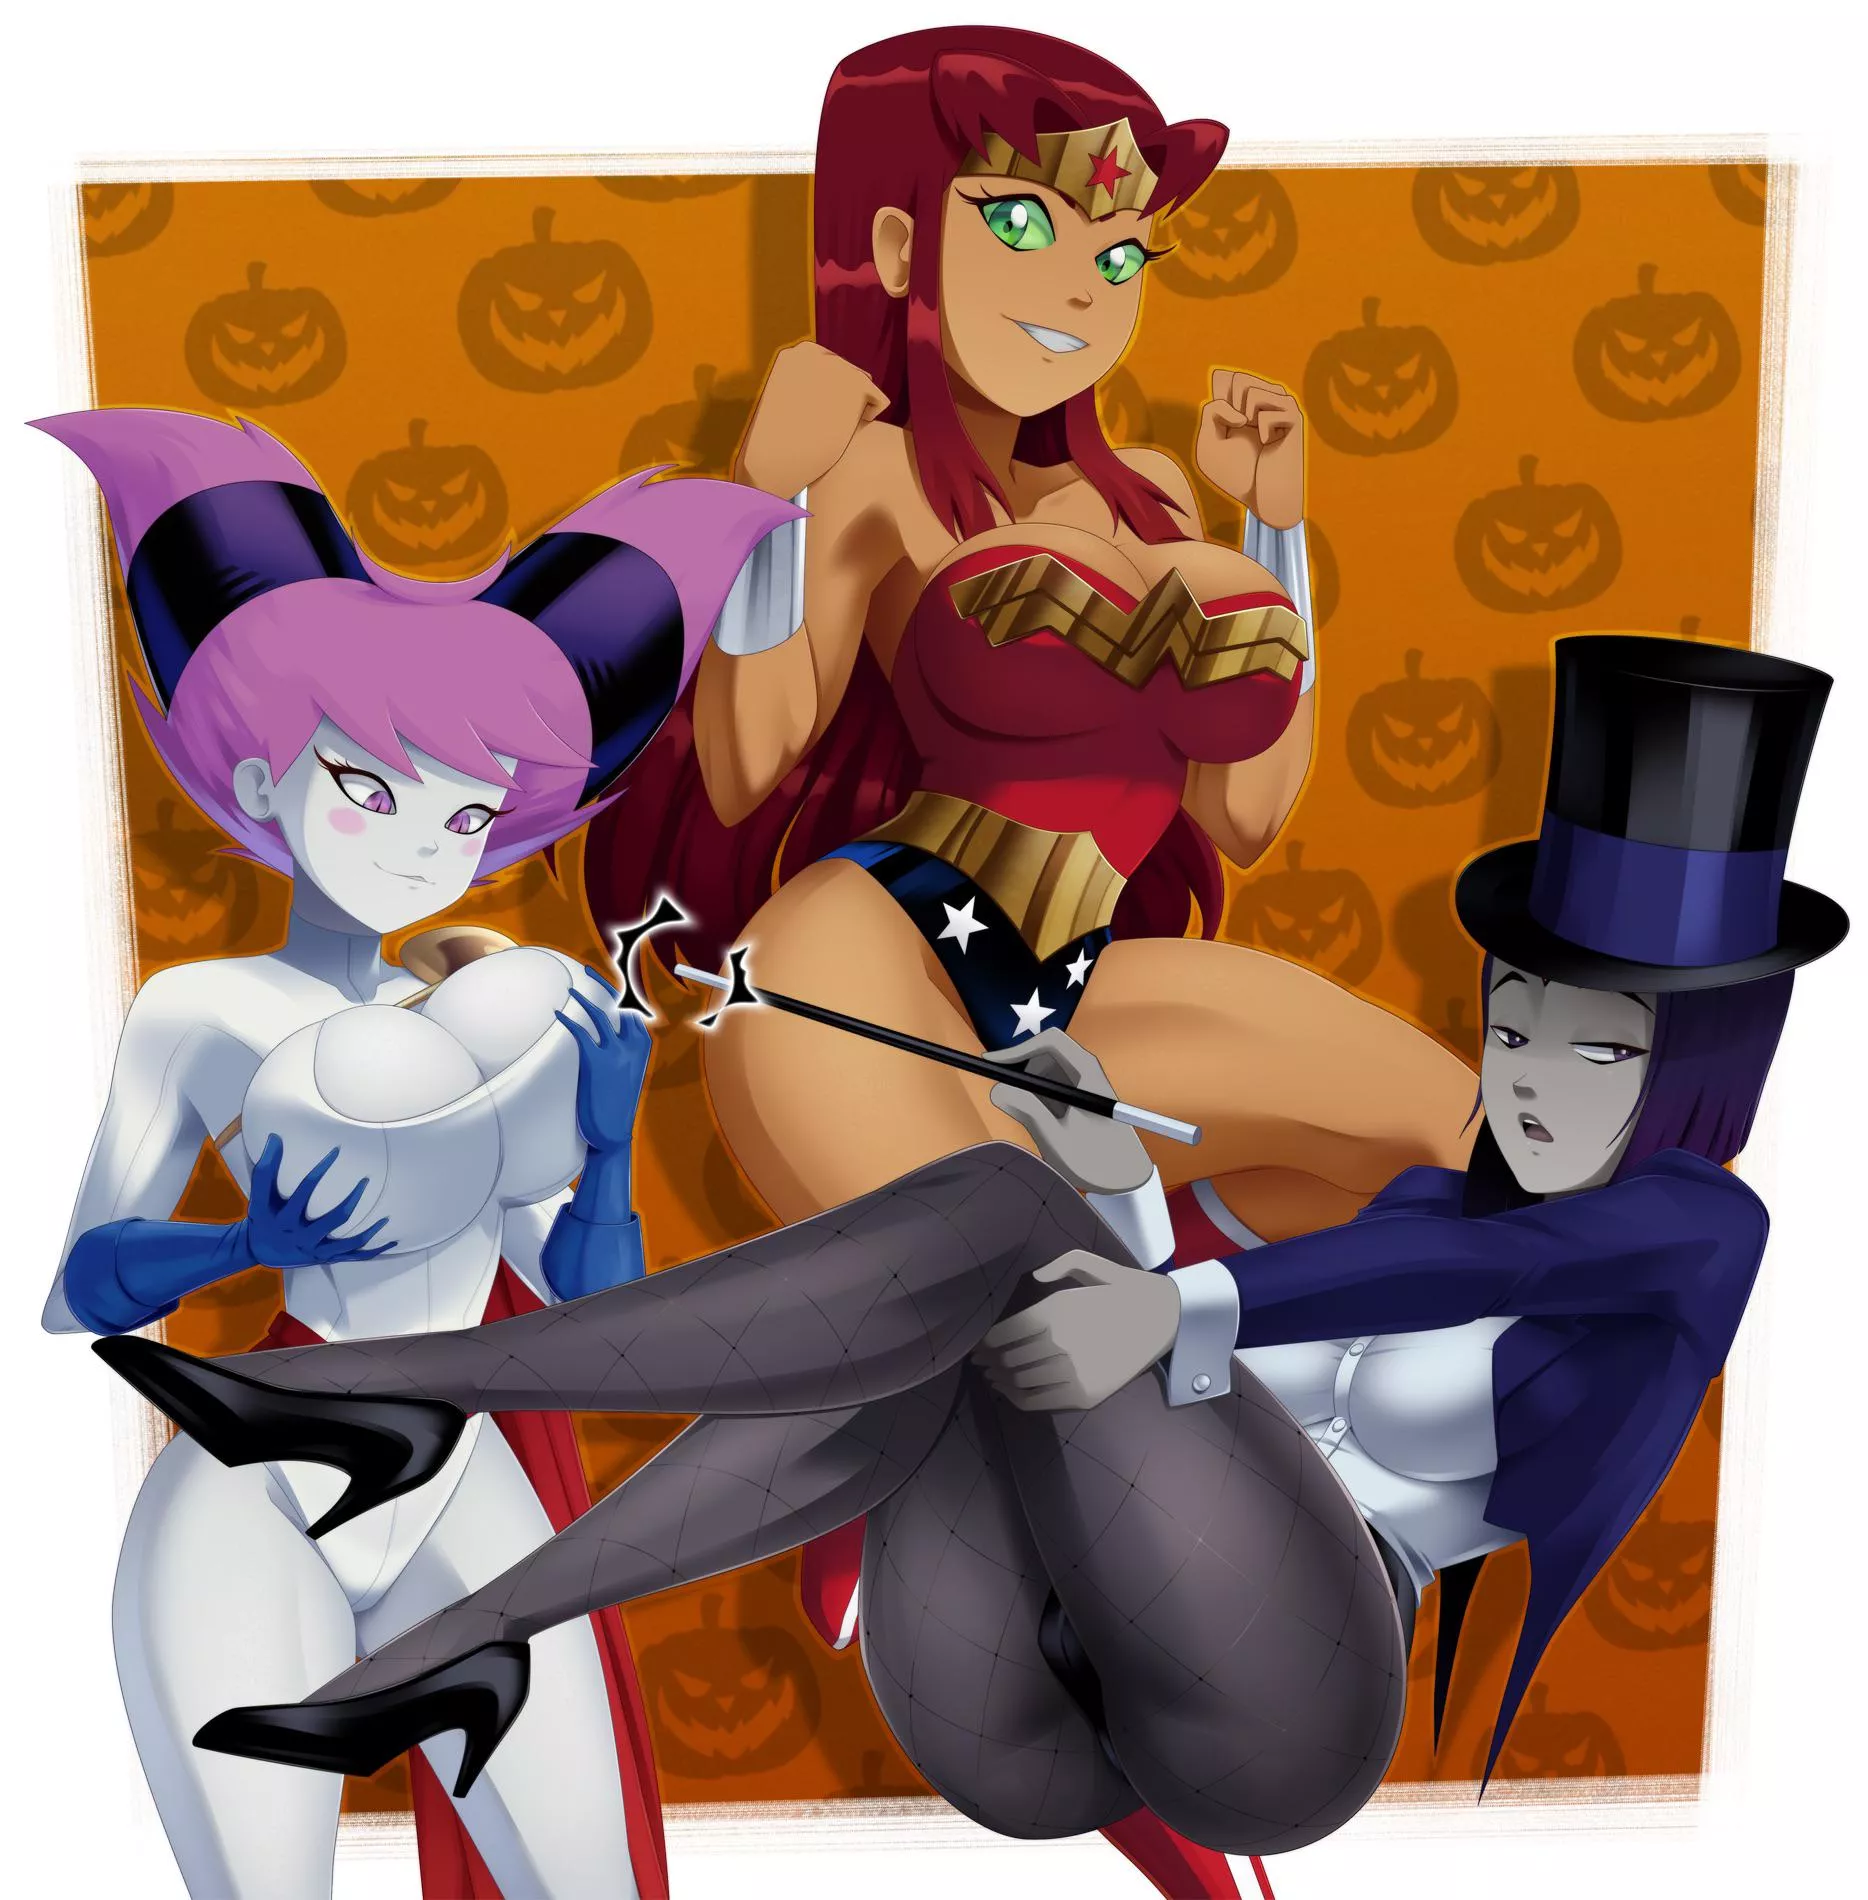 1868px x 1900px - Jinx, Starfire and Raven dress as justice league members for Halloween  (Ravenravenraven) nudes by unamusedseal